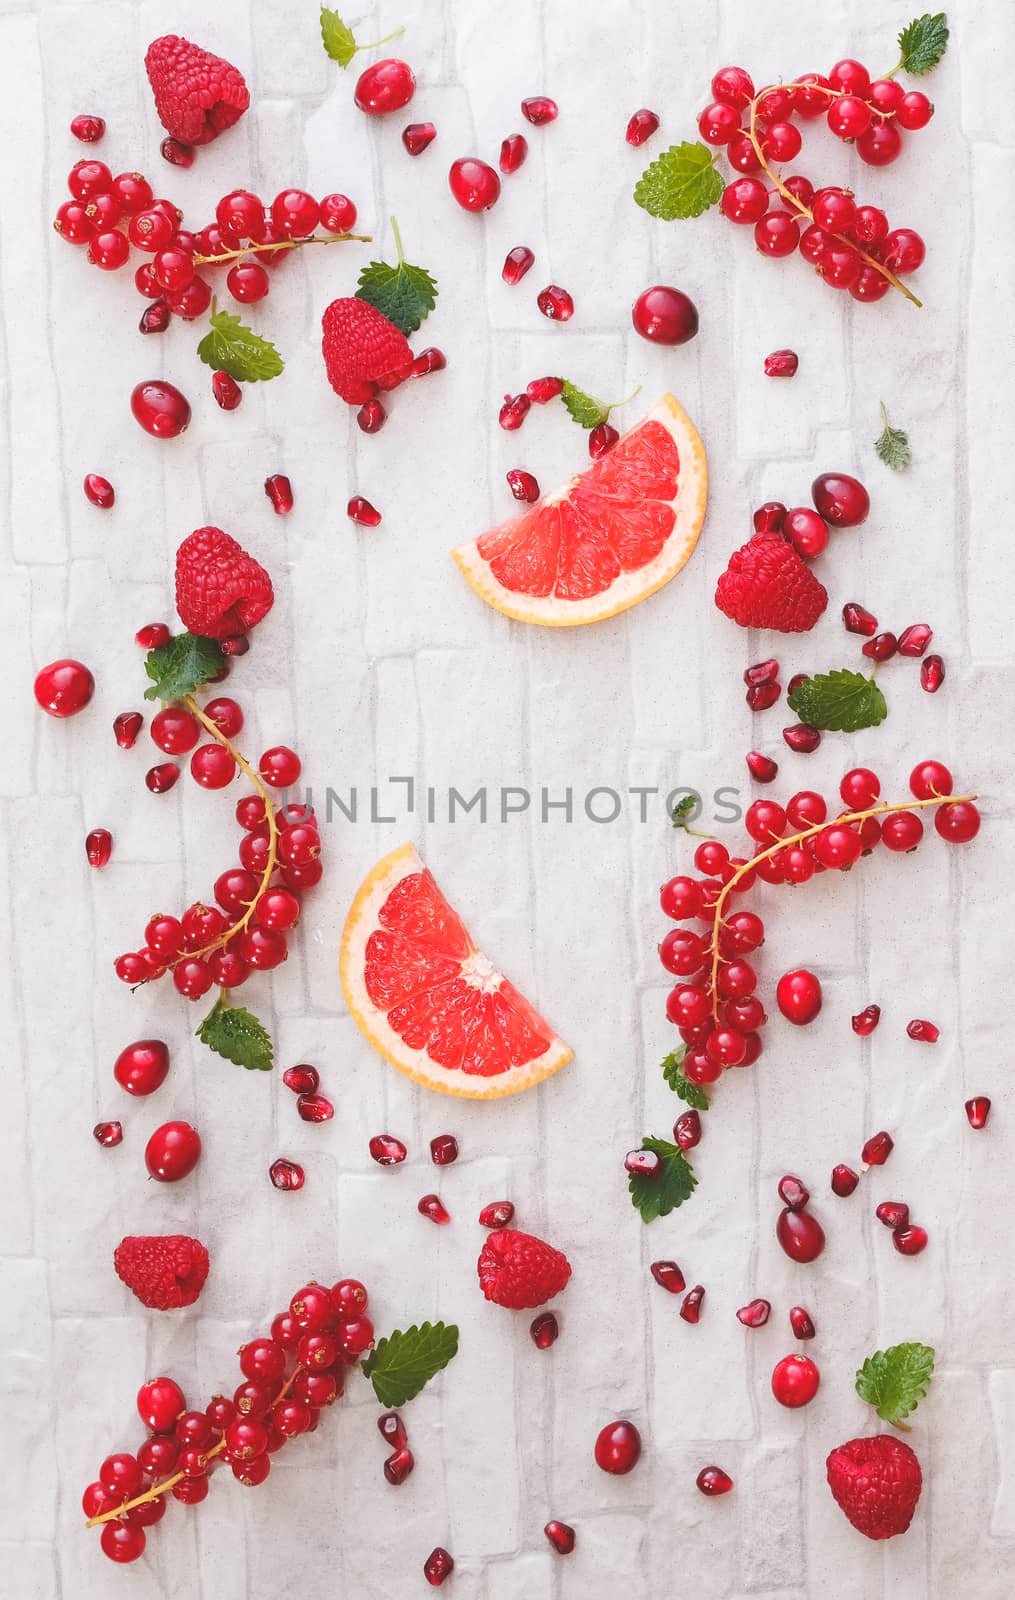 Fresh whole and sliced red fruits by Slast20